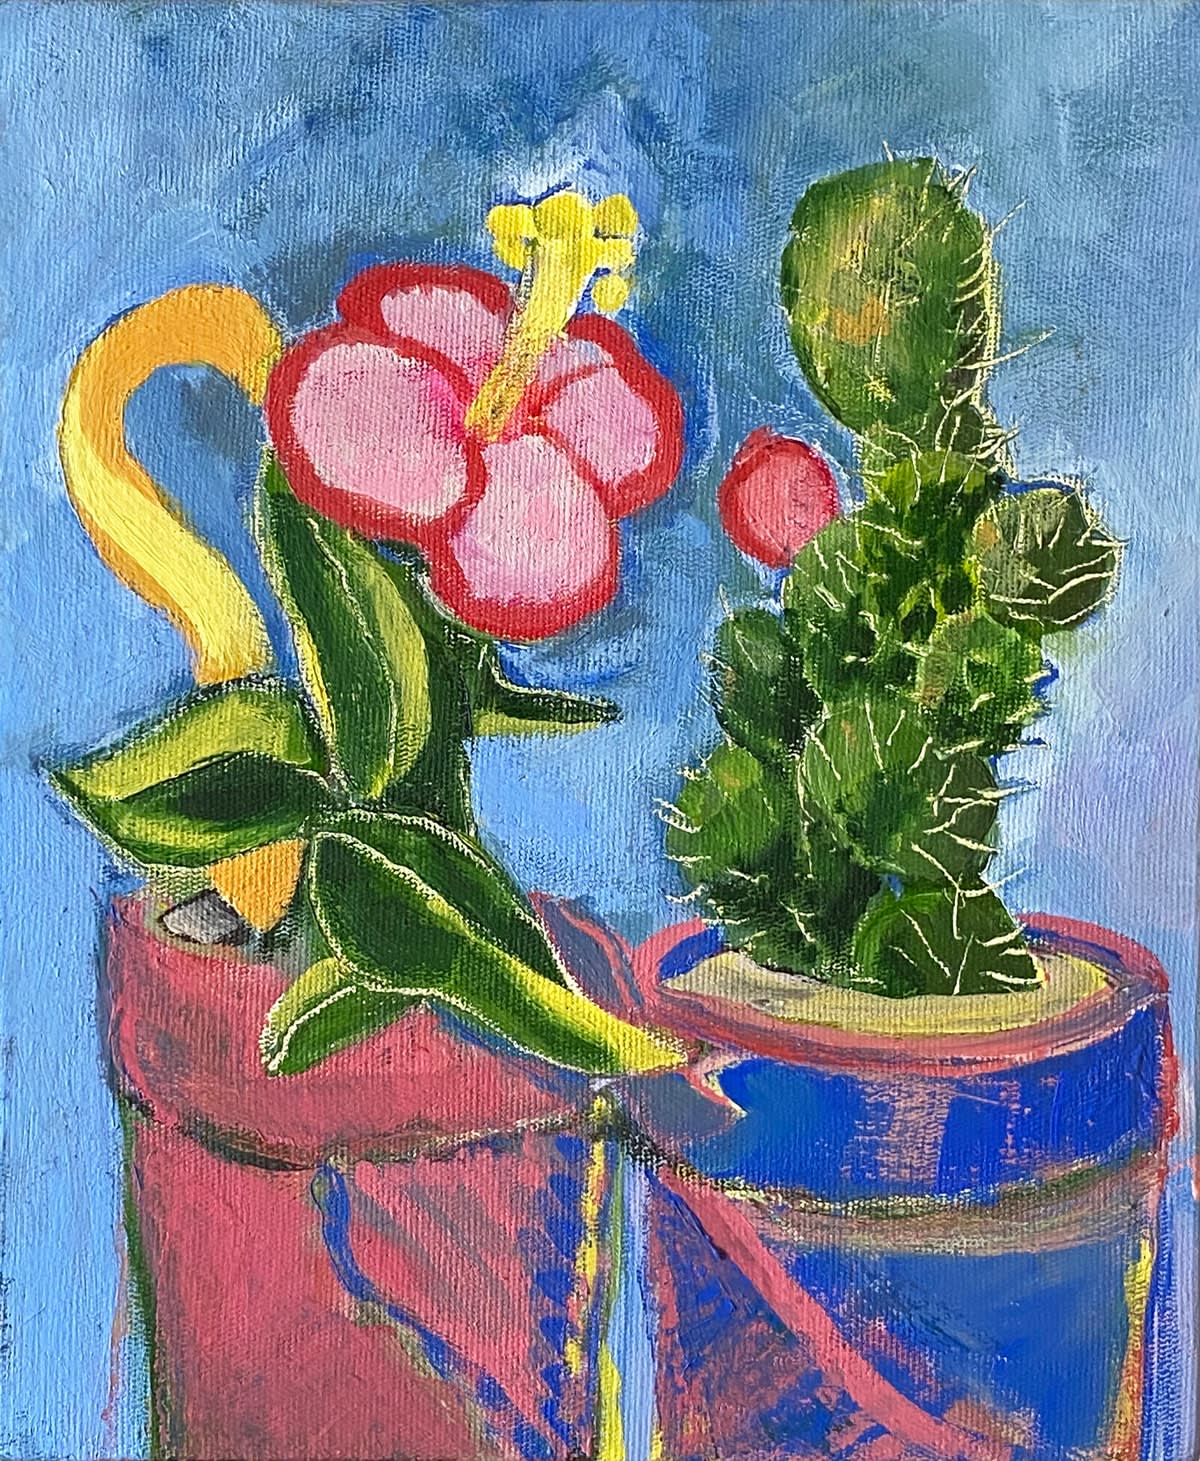 Ari Lankin, The Flower and The Cactus, 2018